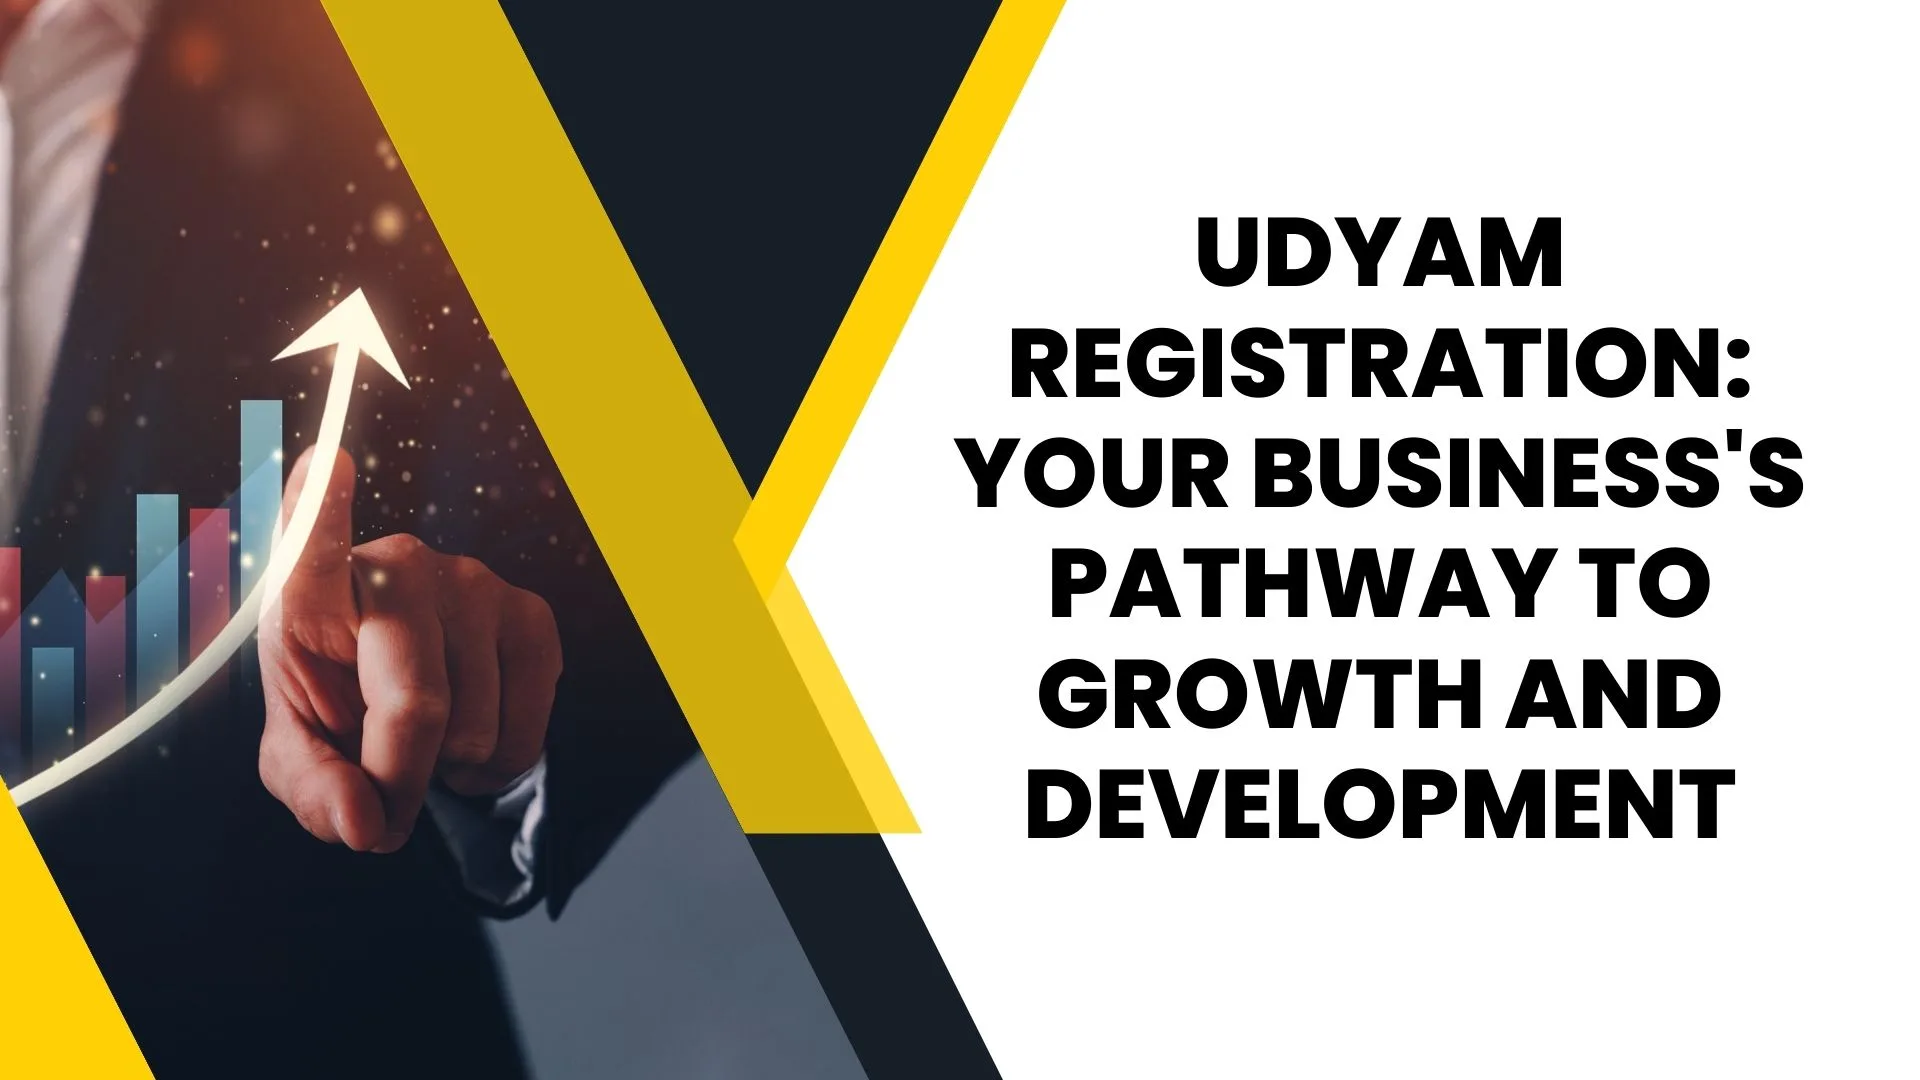 Udyam Registration Your Business's Pathway to Growth and Development